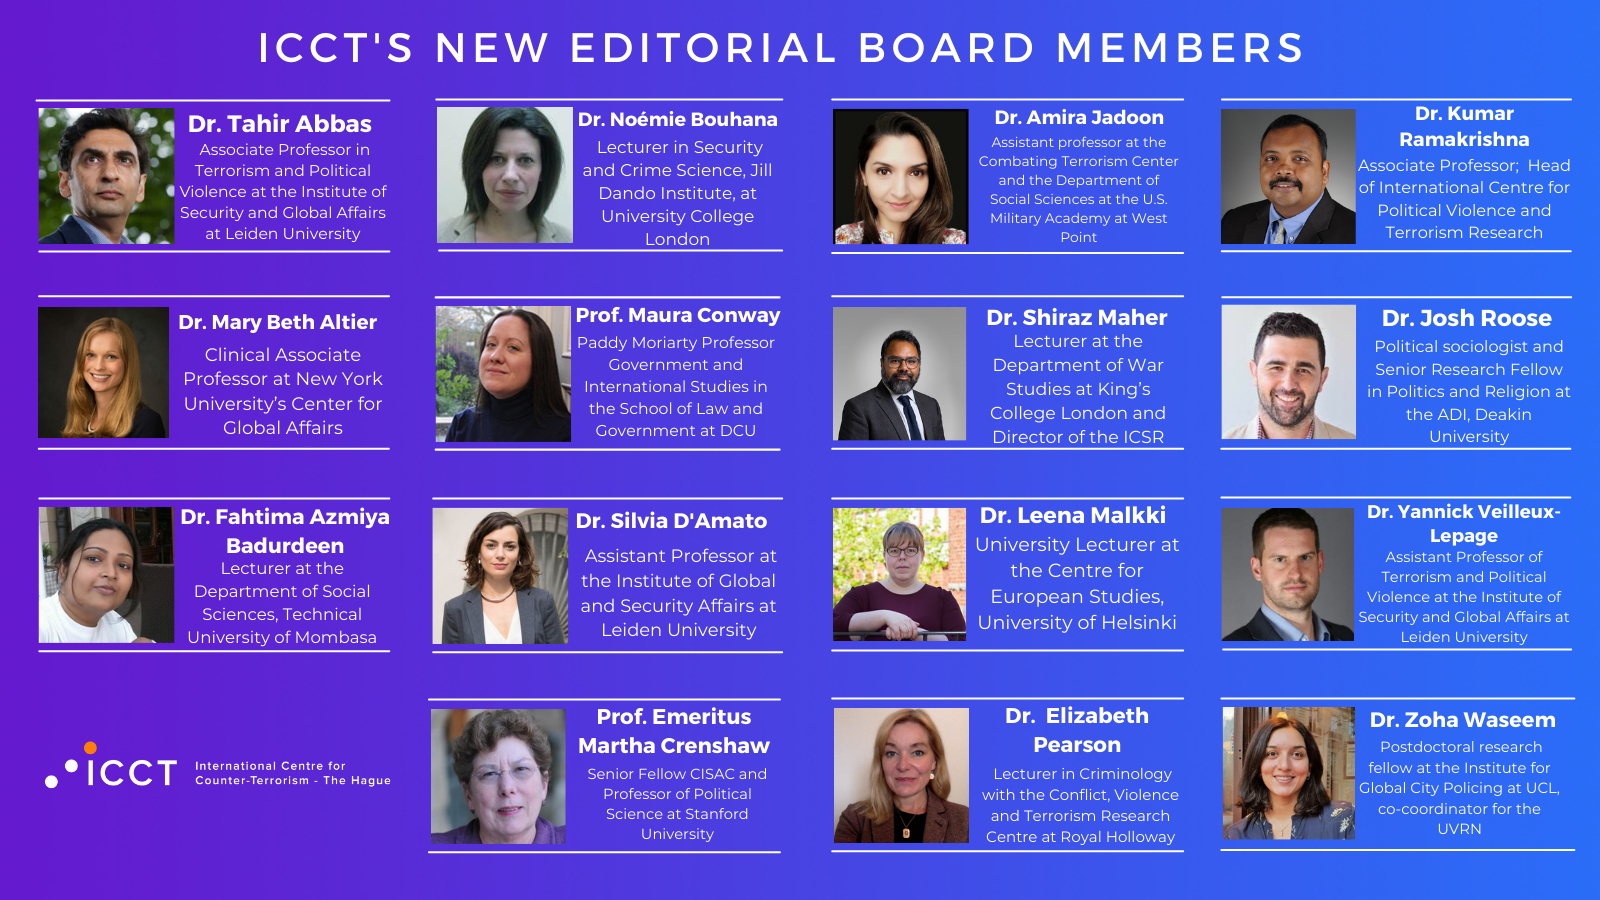 ICCT's New Editorial Board Members  International Centre for  Counter-Terrorism - ICCT